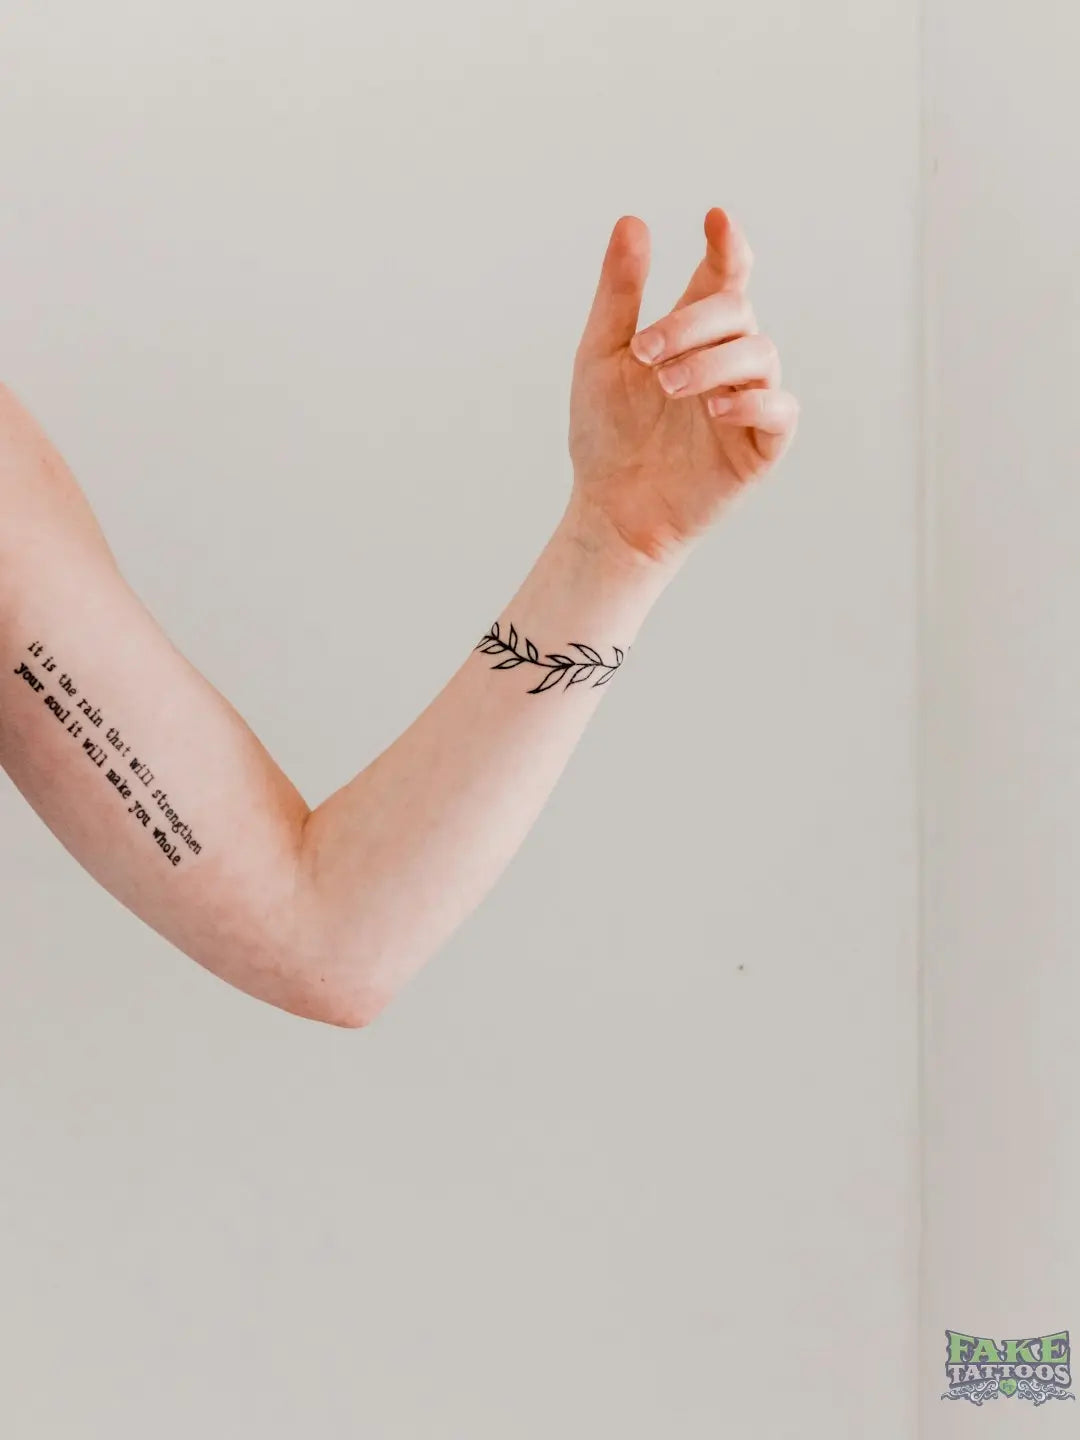 Express Your Style with Fake Tattoos: The Perfect Artistic Statement!